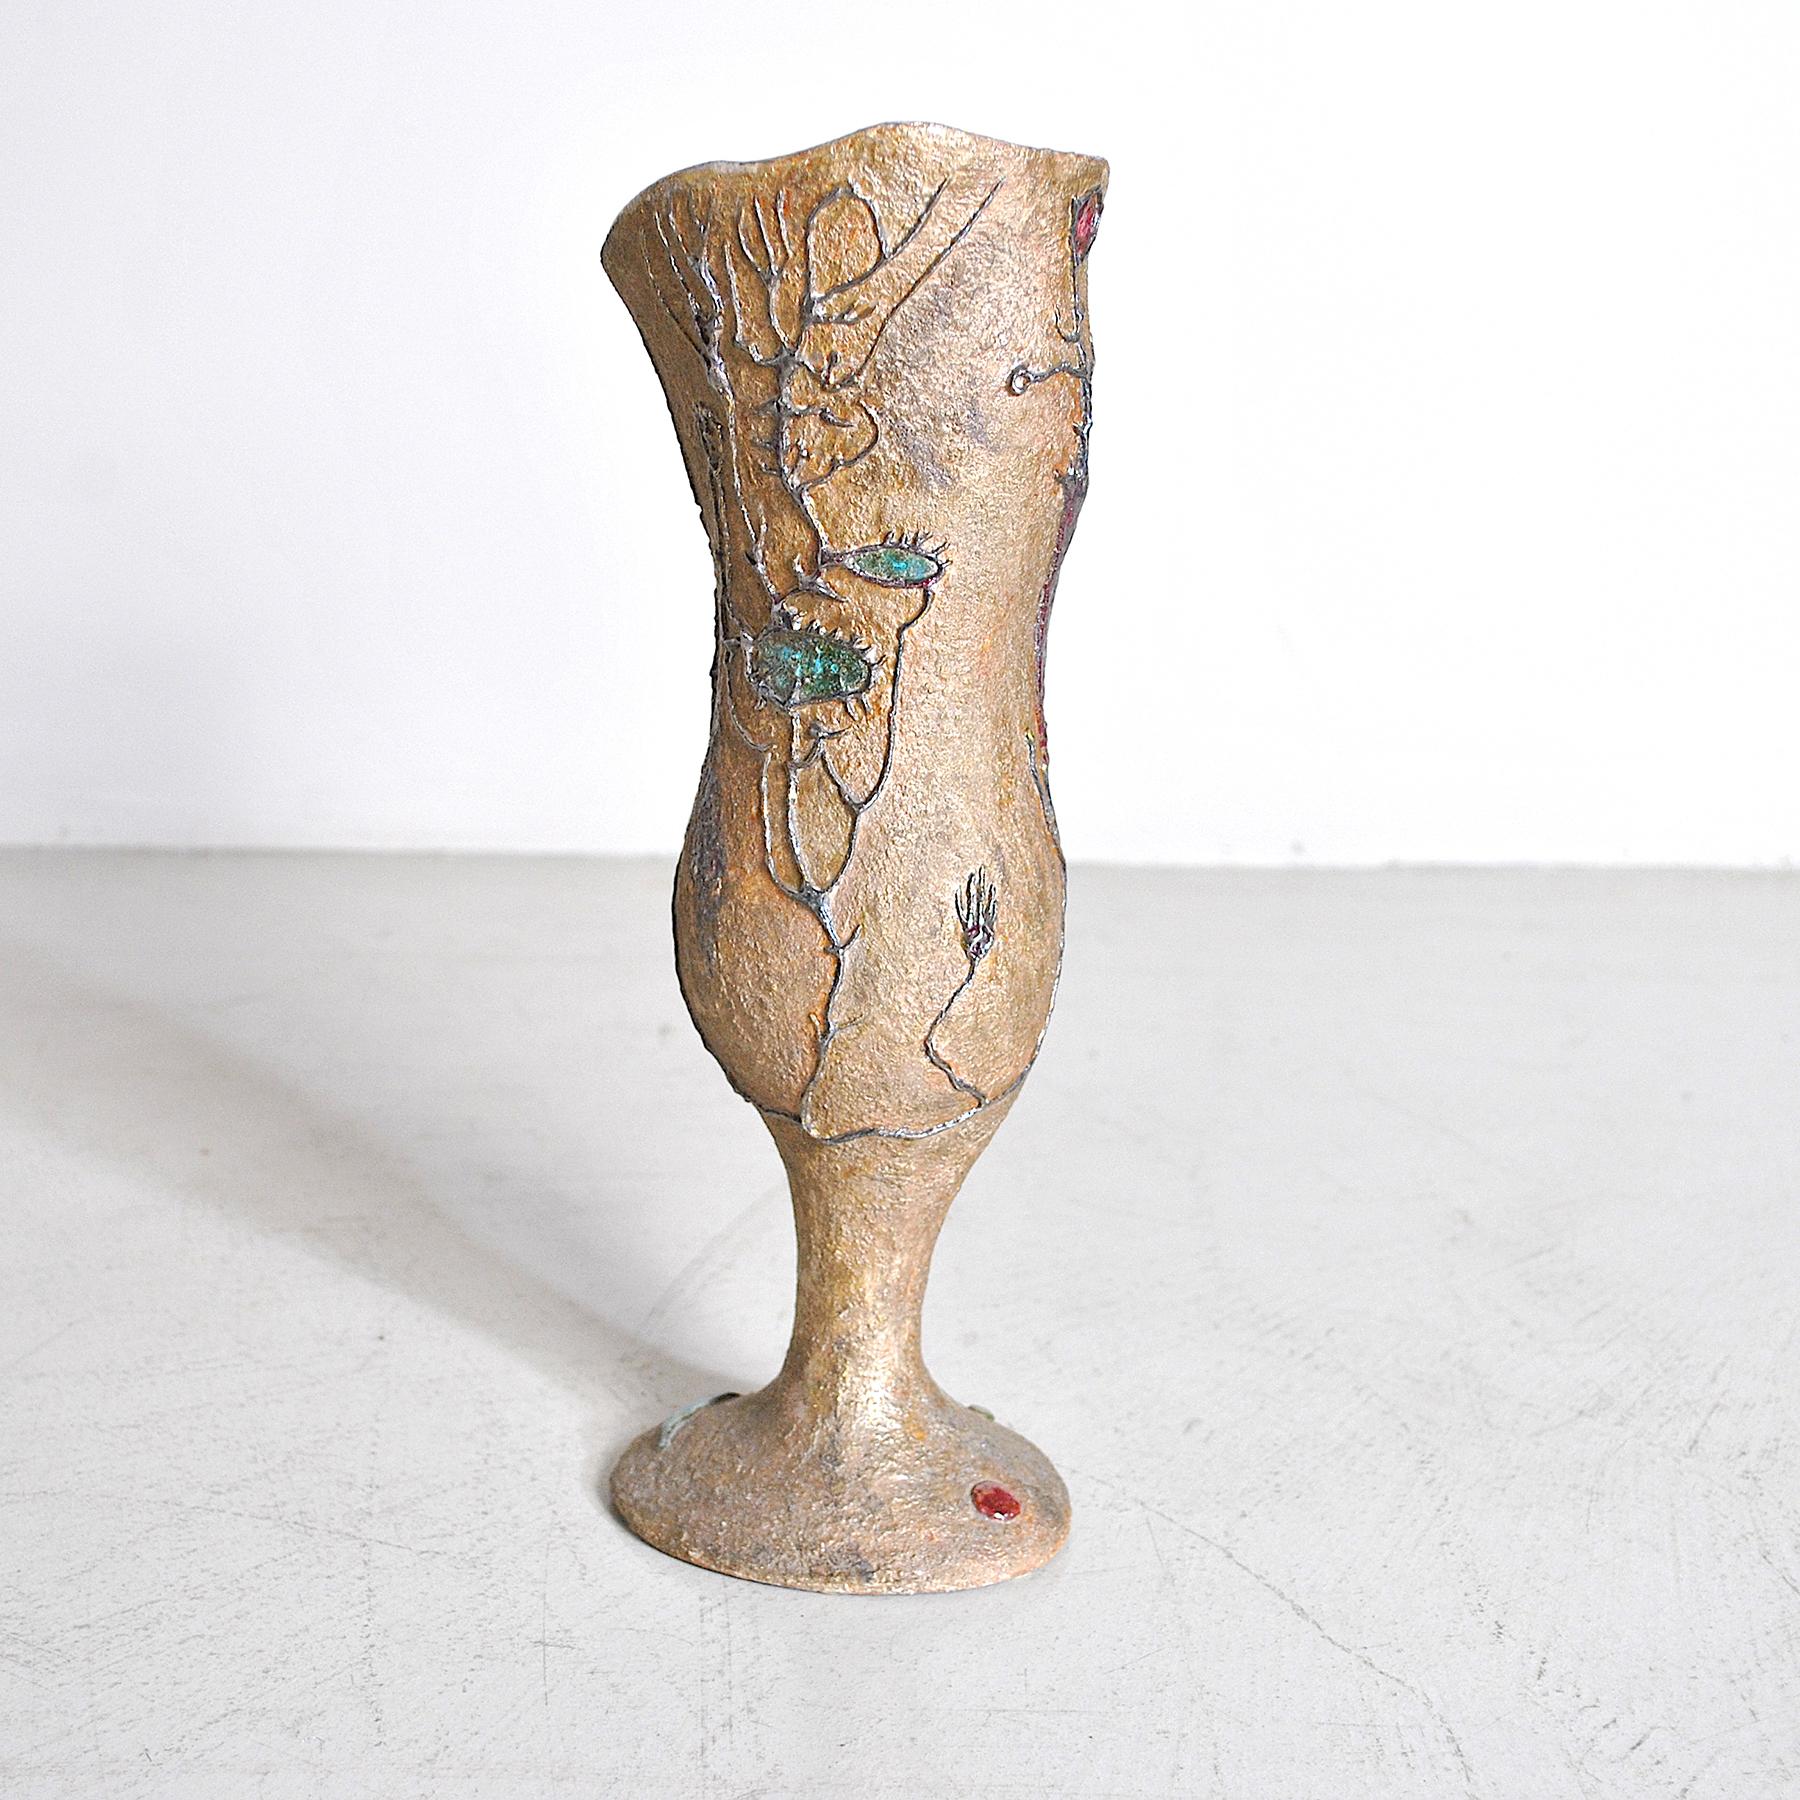 Reflected ceramic goblet sculpture with a pastille decoration of abstract shapes, Pietro Melandri

 

In 1925 Melandri's ceramics are at the Exposition des Arts Decoratives in Paris and in 1930 they arrive at the Triennale of Monza and at the